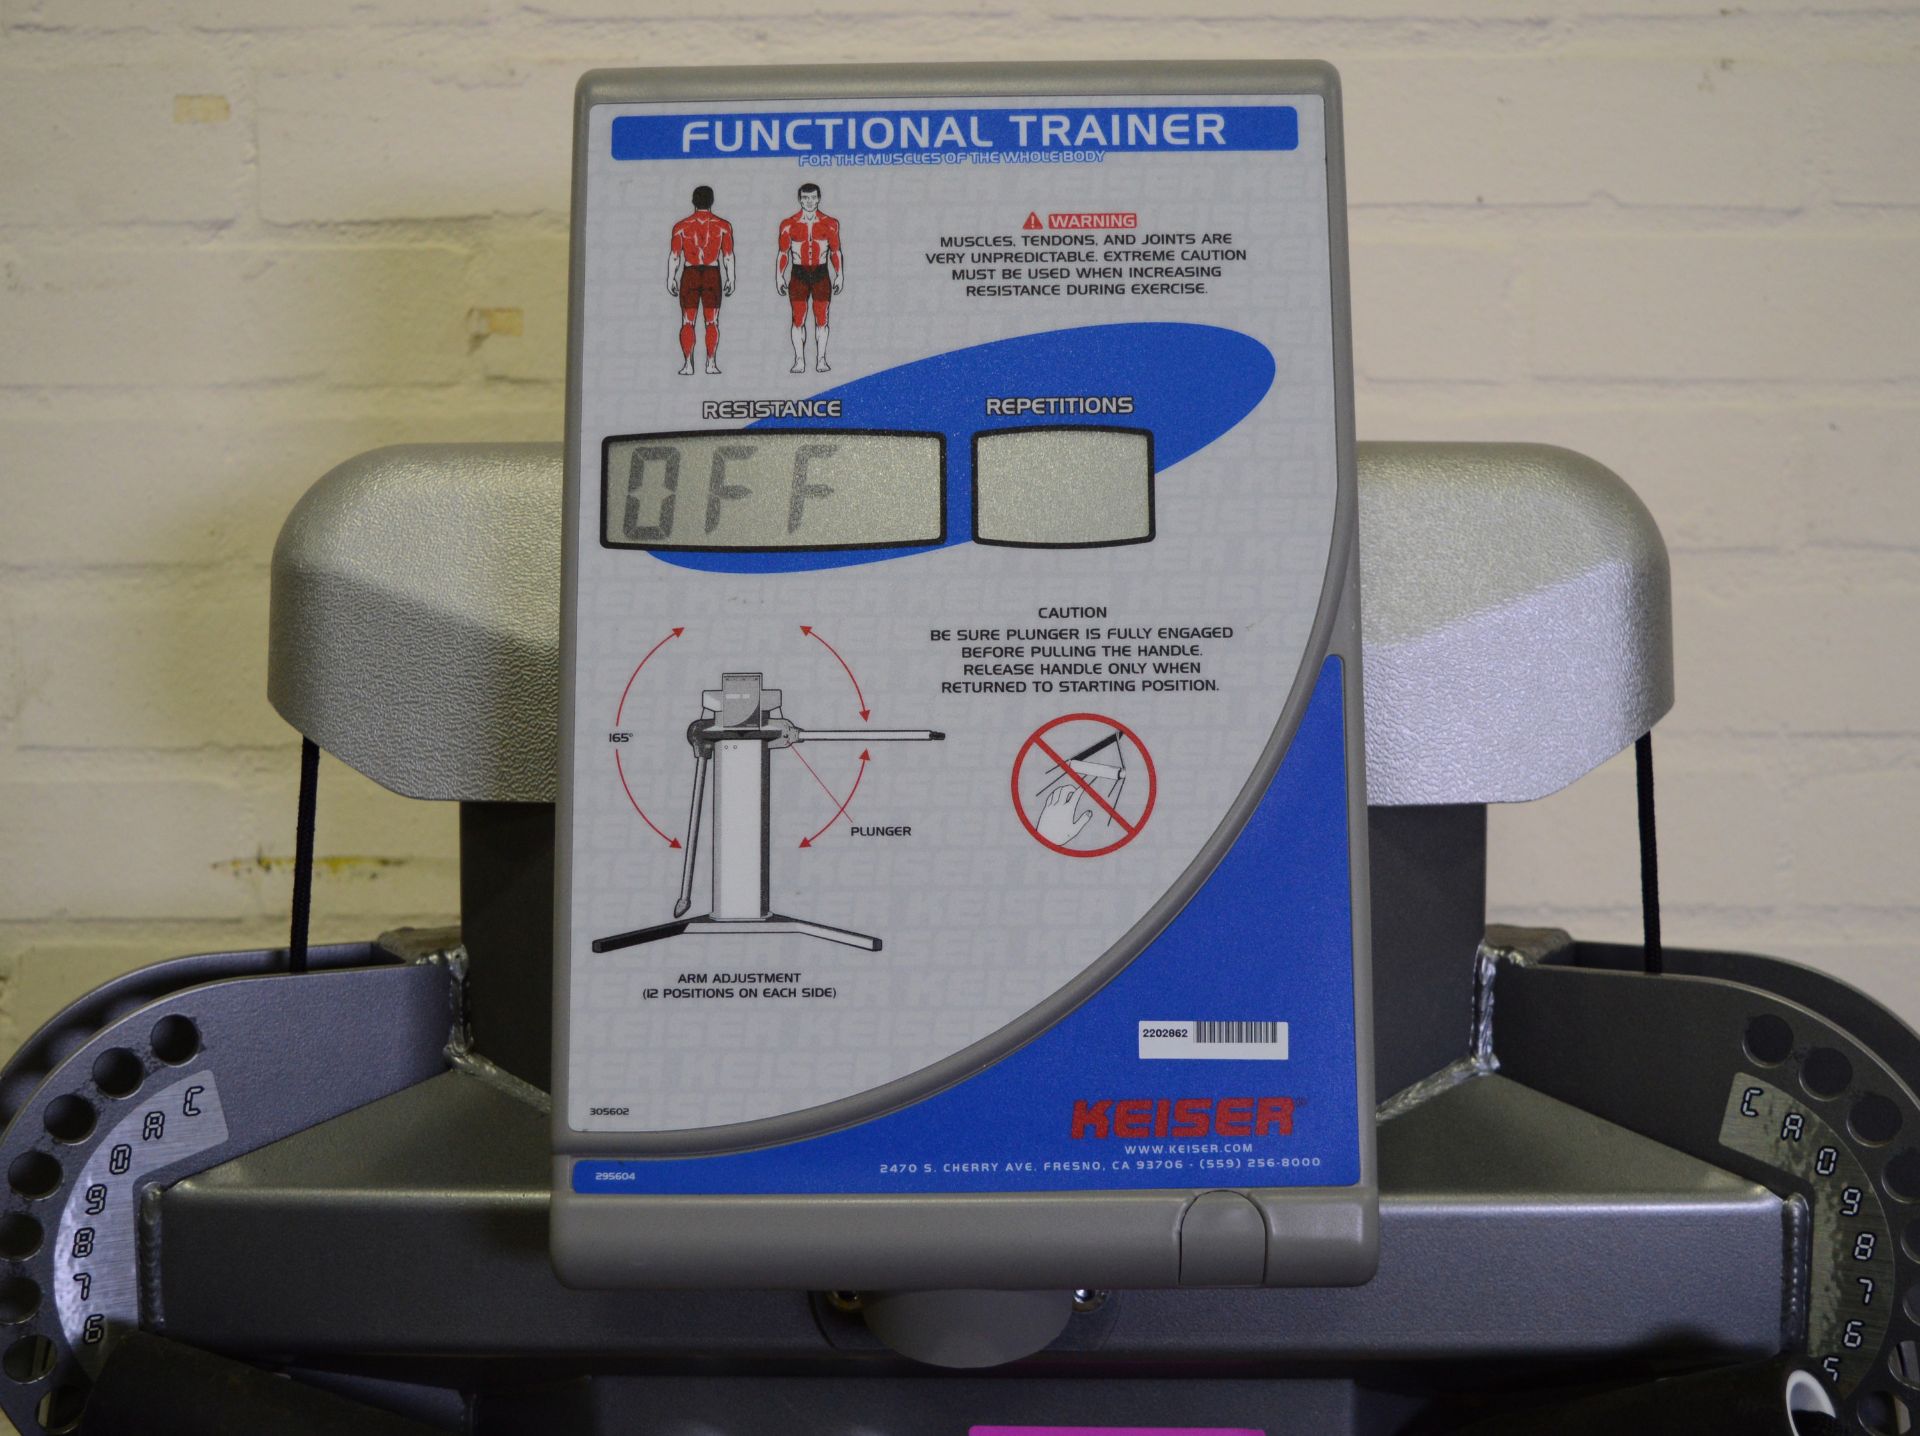 Keiser Functional Trainer Incomplete - Image 2 of 3